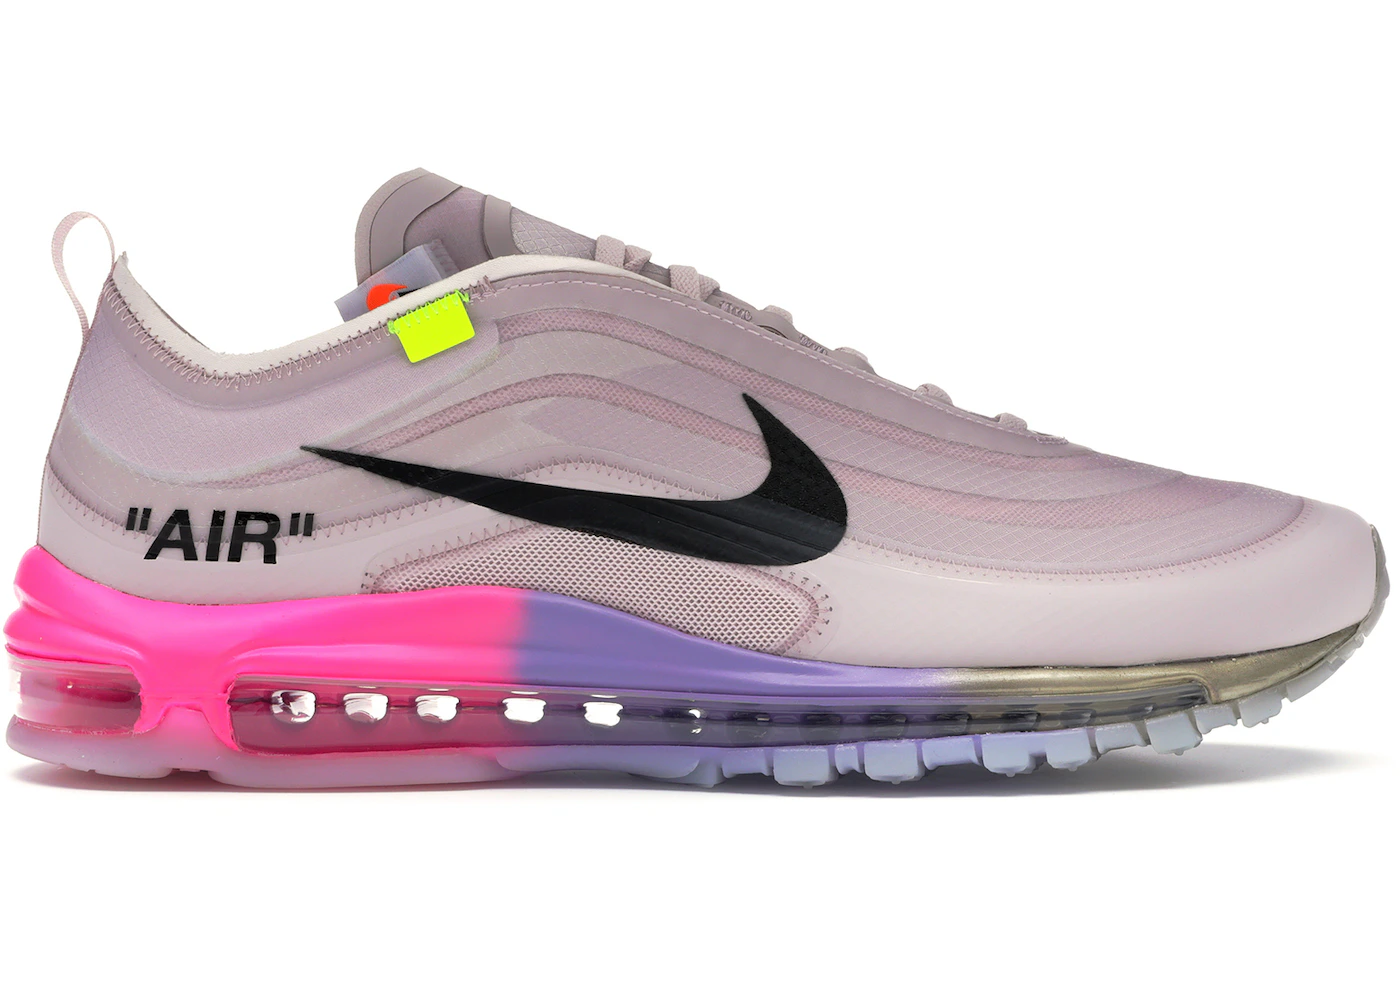 tjære Fighter antage Nike Air Max 97 Off-White Elemental Rose Serena Queen - AJ4585-600 - US